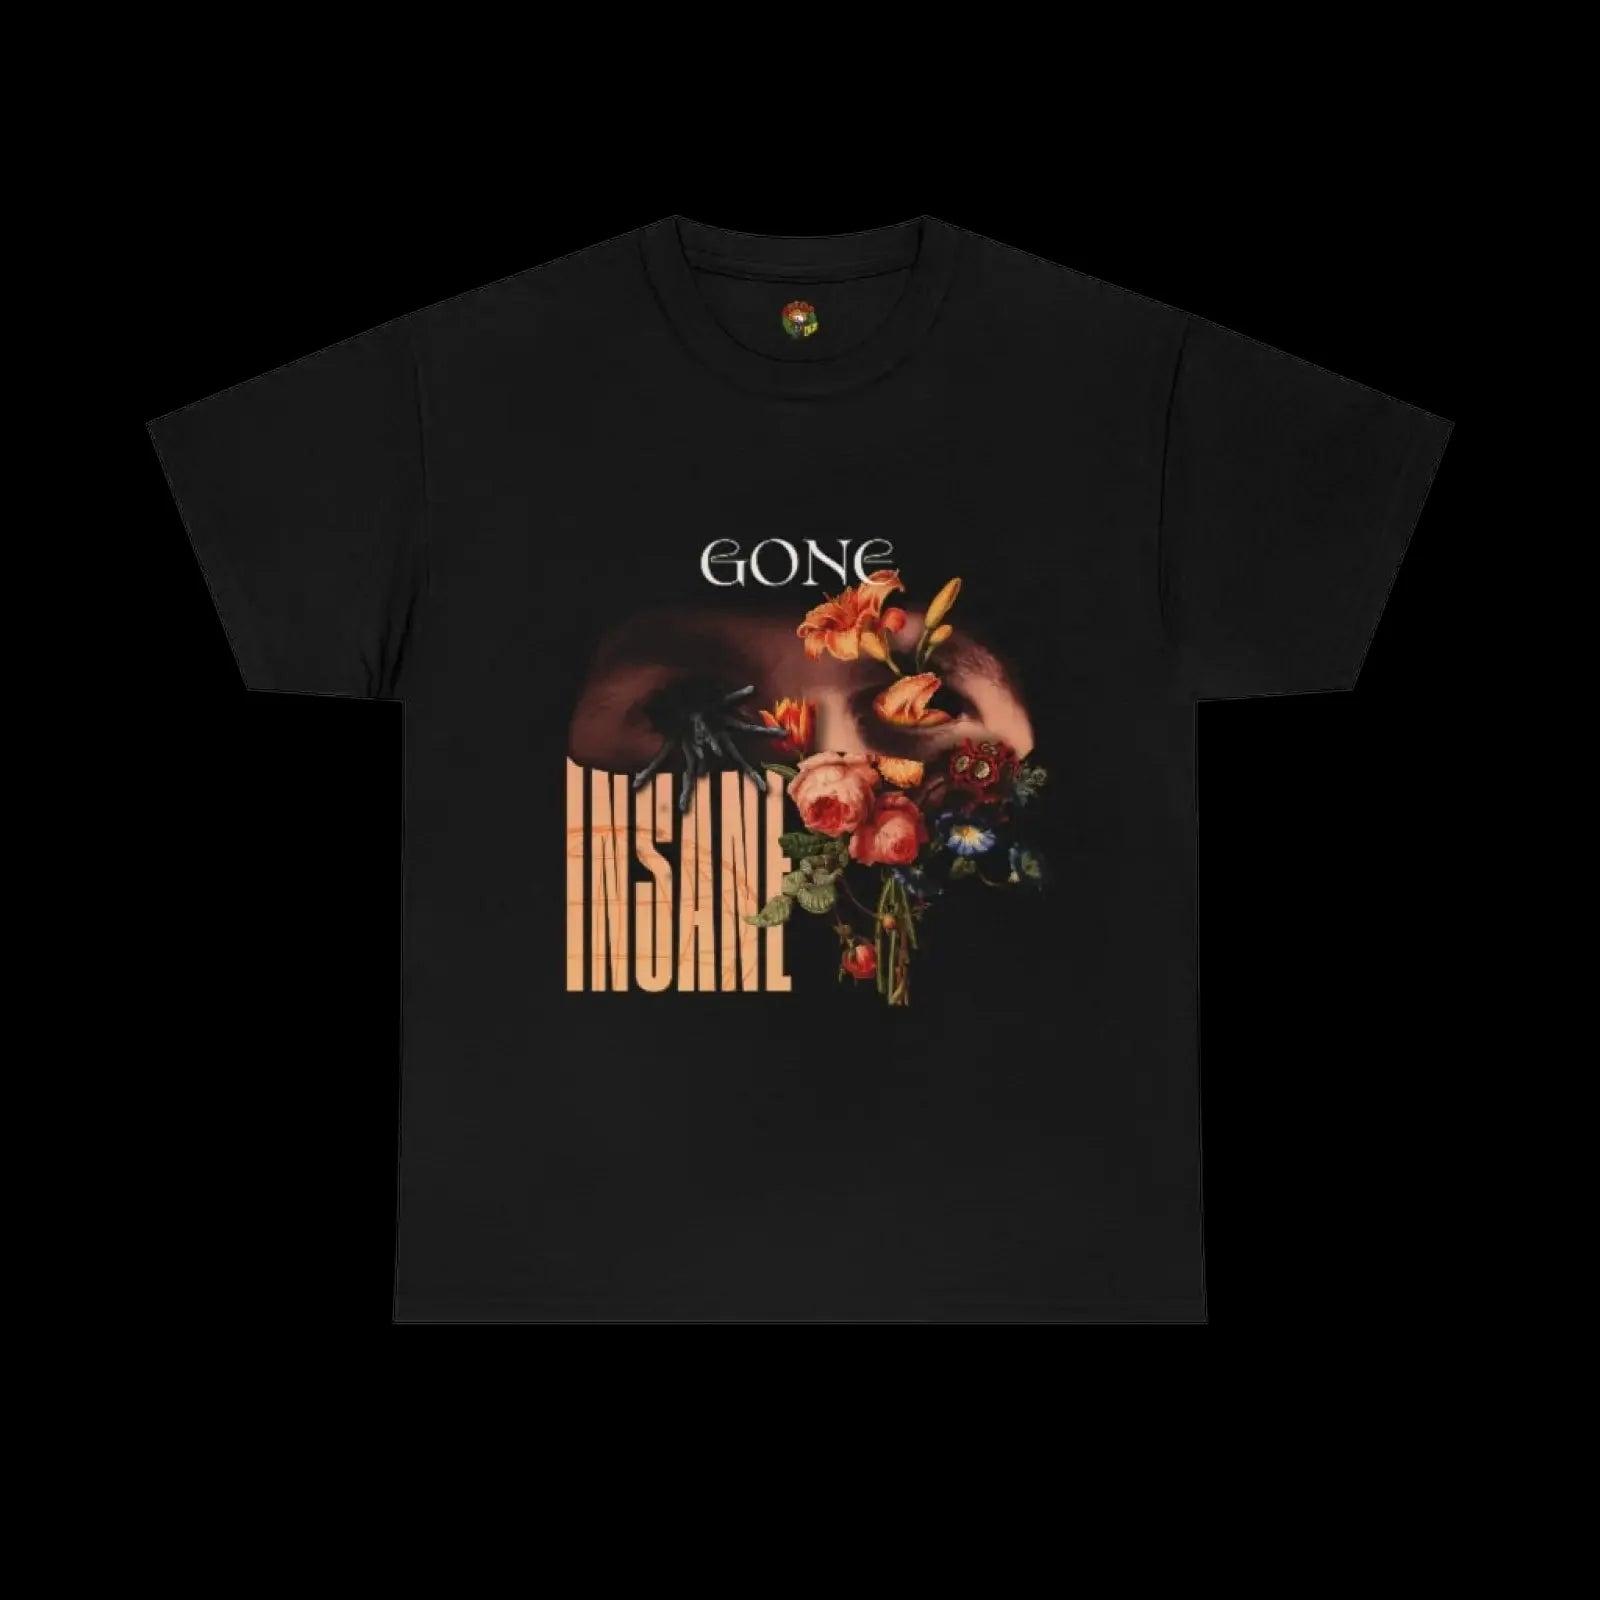 Gone Insane - T-shirt - Exclusive To Tiptop Deals!